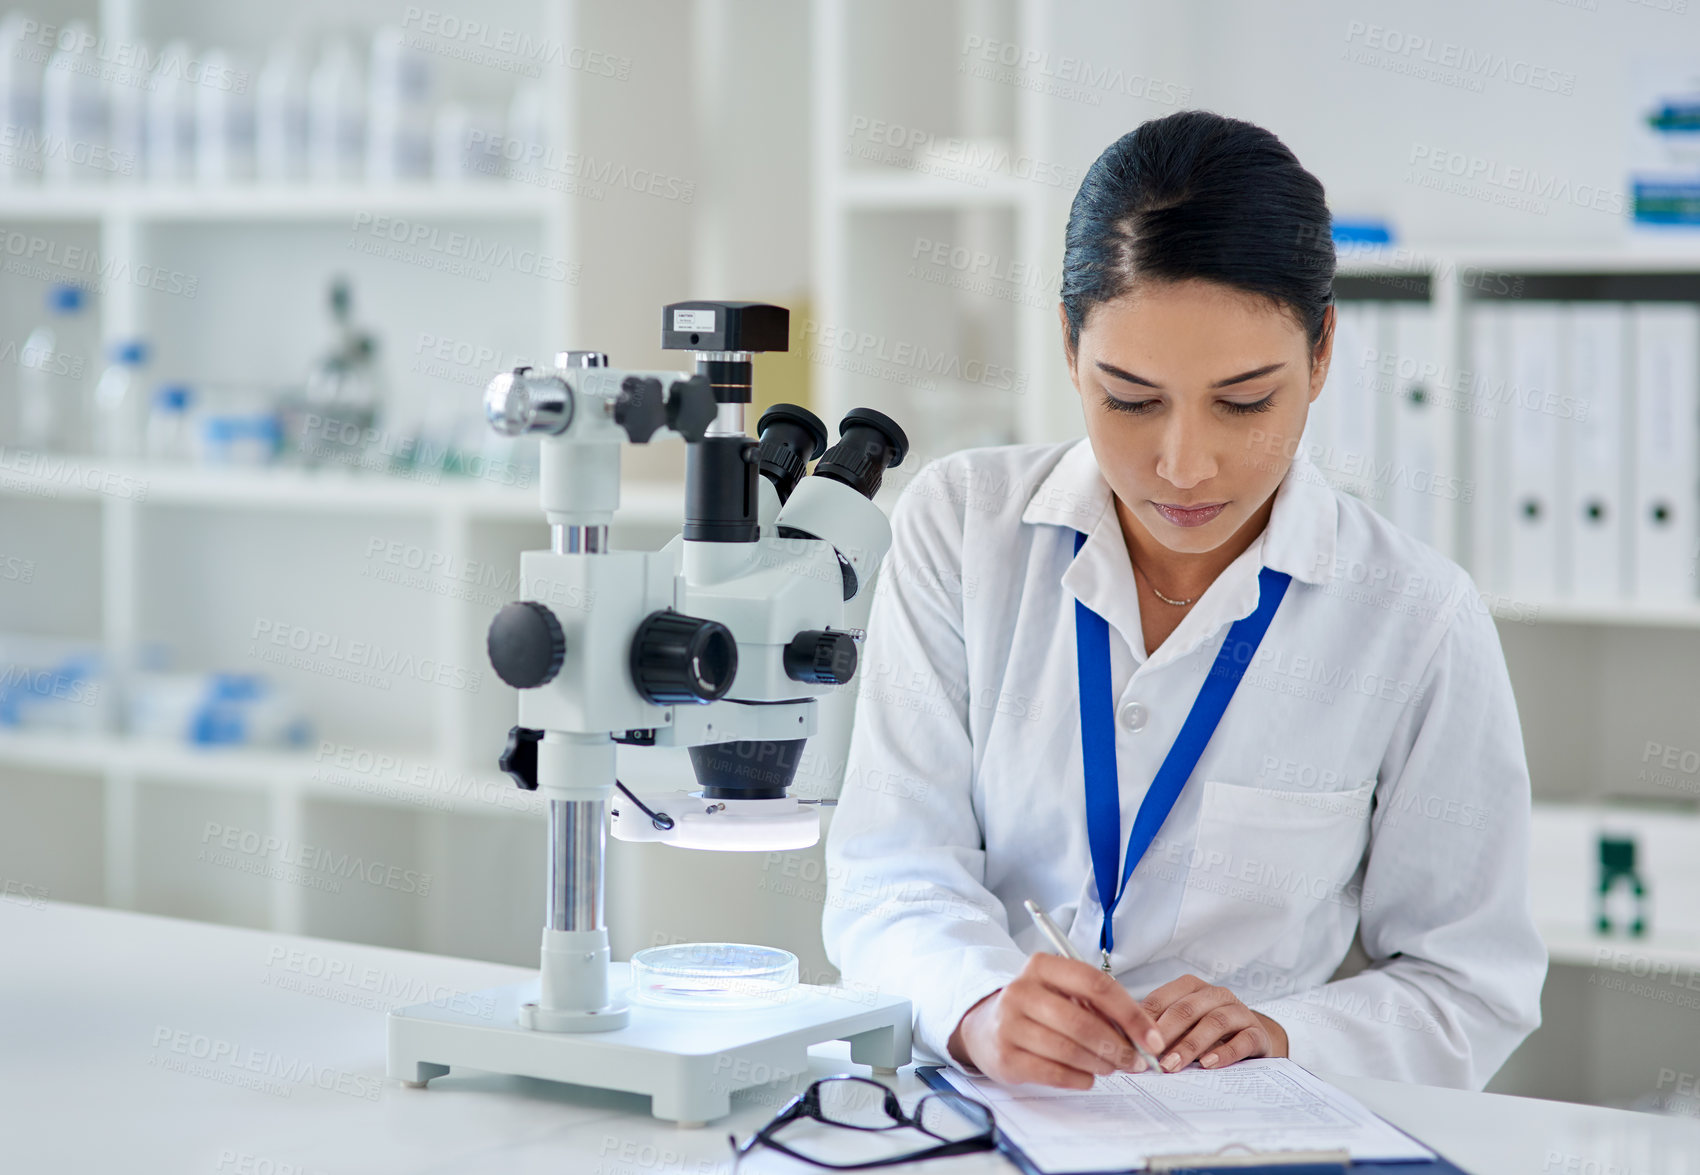 Buy stock photo Shot of a young woman filling out paperwork while working a laboratory